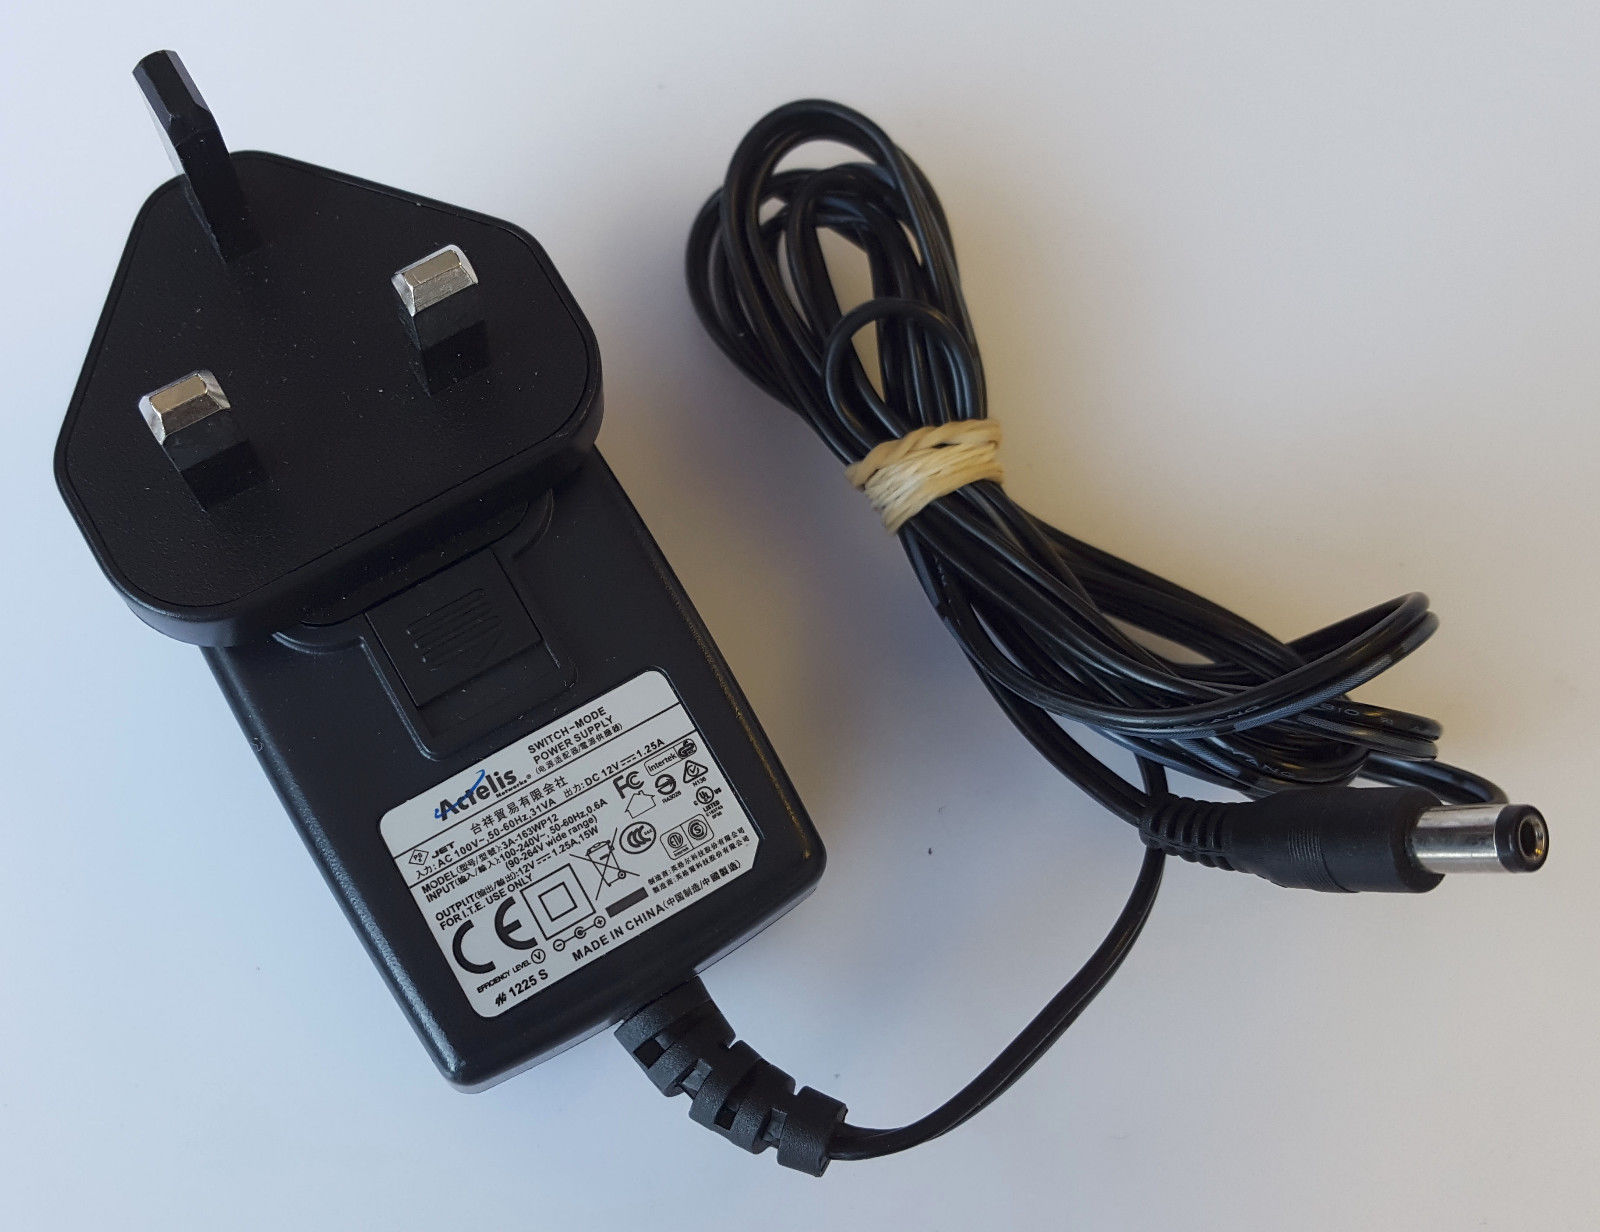 New ACTELIS 3A-163WP12 12V 1.25A AC/DC POWER SUPPLY ADAPTER Product Description Condition:100% B